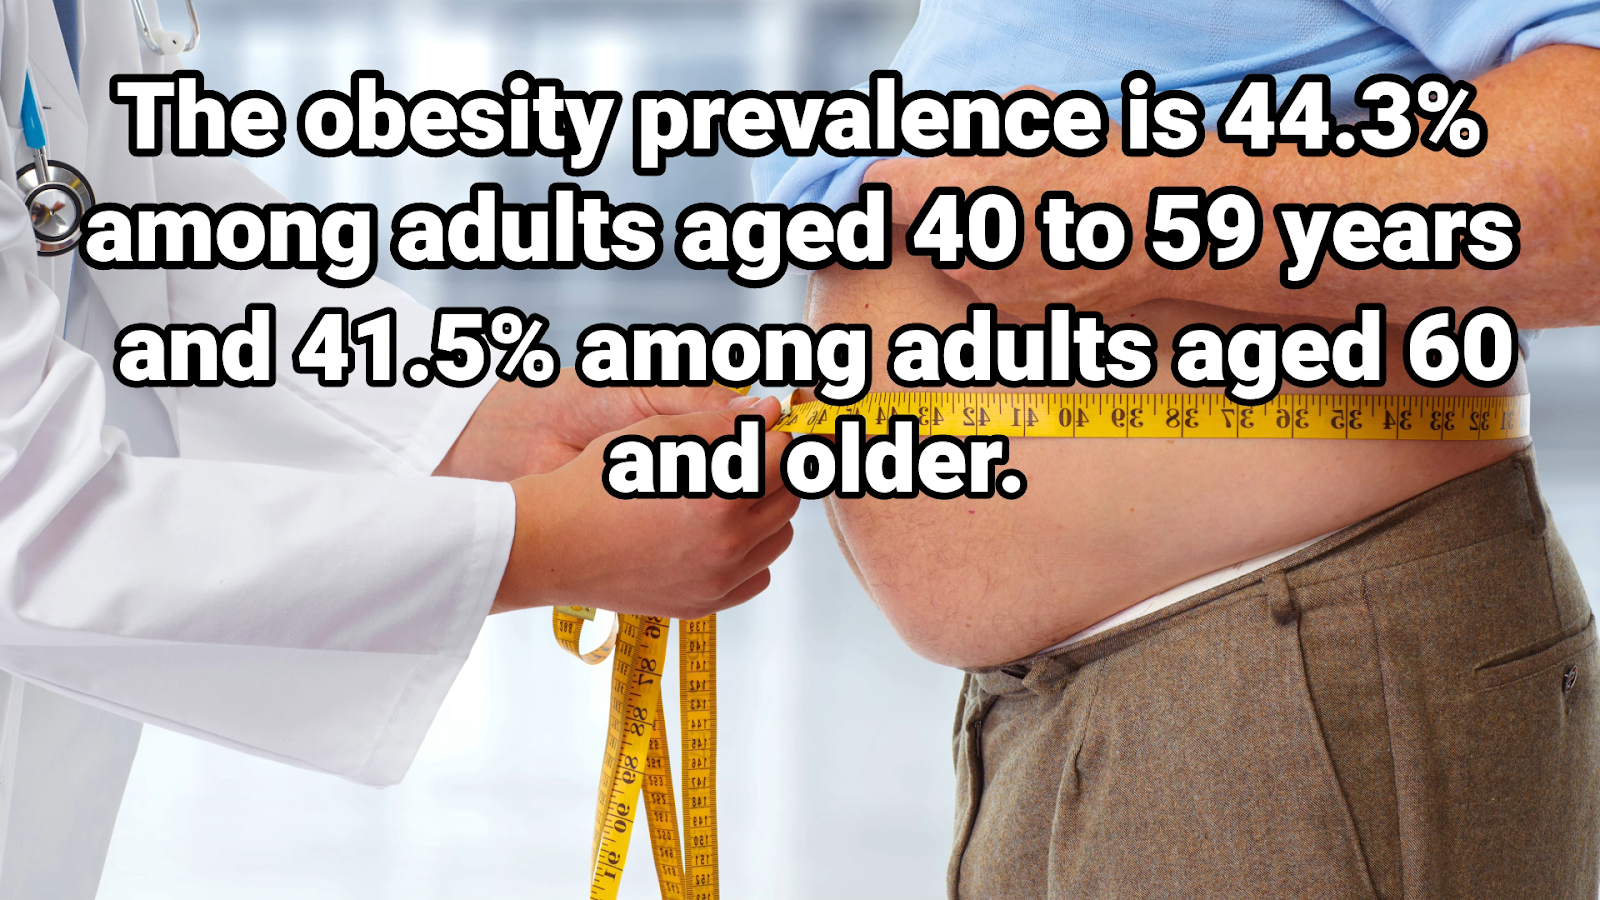 Obesity is more prevalent than we realize among adults